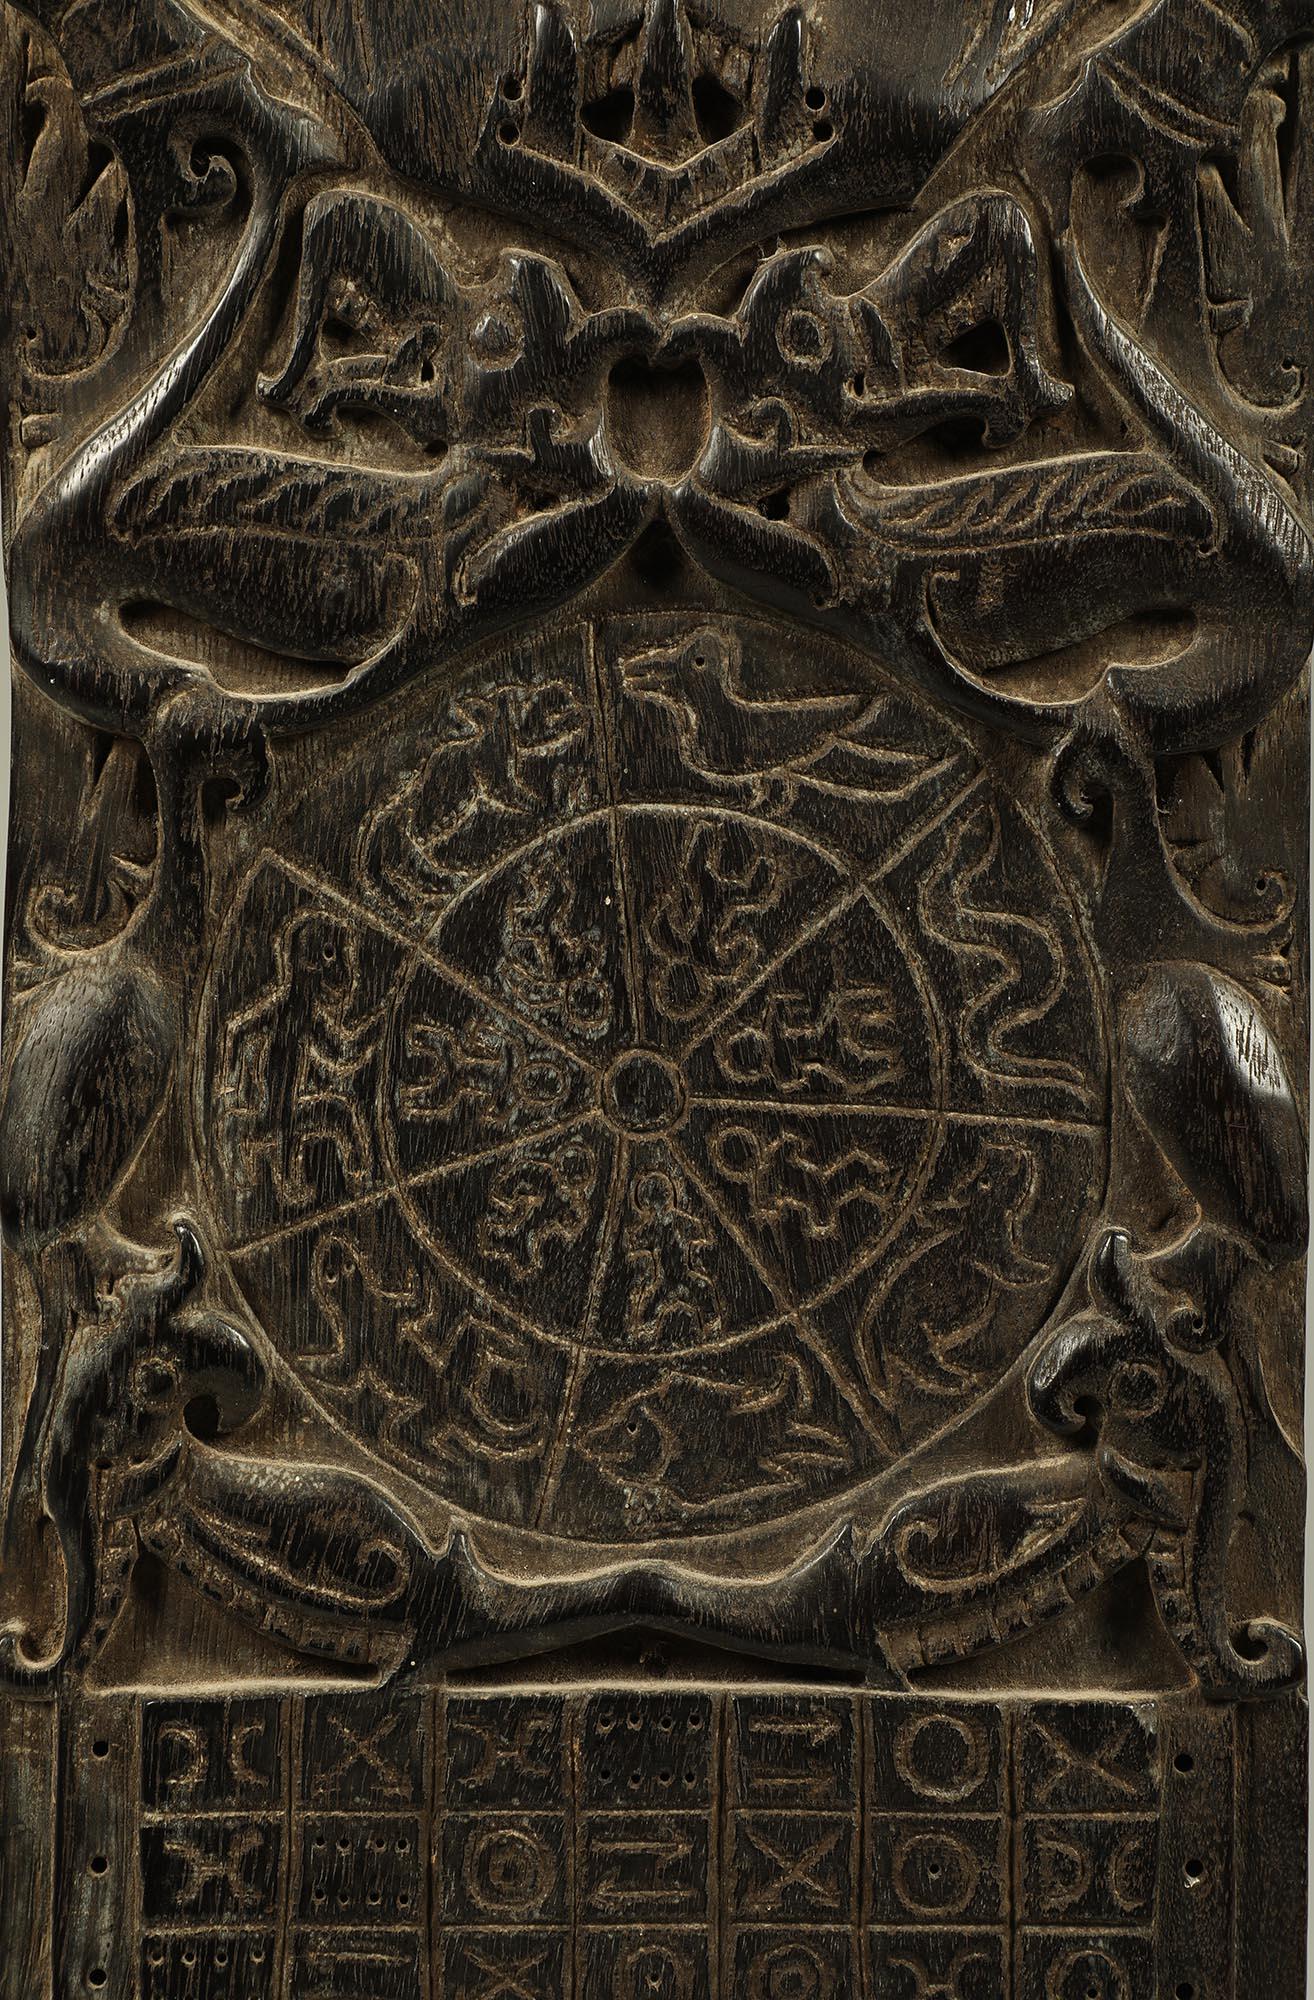 Classic Dayak carved wood calendar board with Aso or Dragon Motifs, Borneo, Indonesia. Traditional very dark wood with carving in relief and incised numbers/calendar marks, and a flat back. 
ex- CA collection, 
18 1/2 inches high, on custom metal